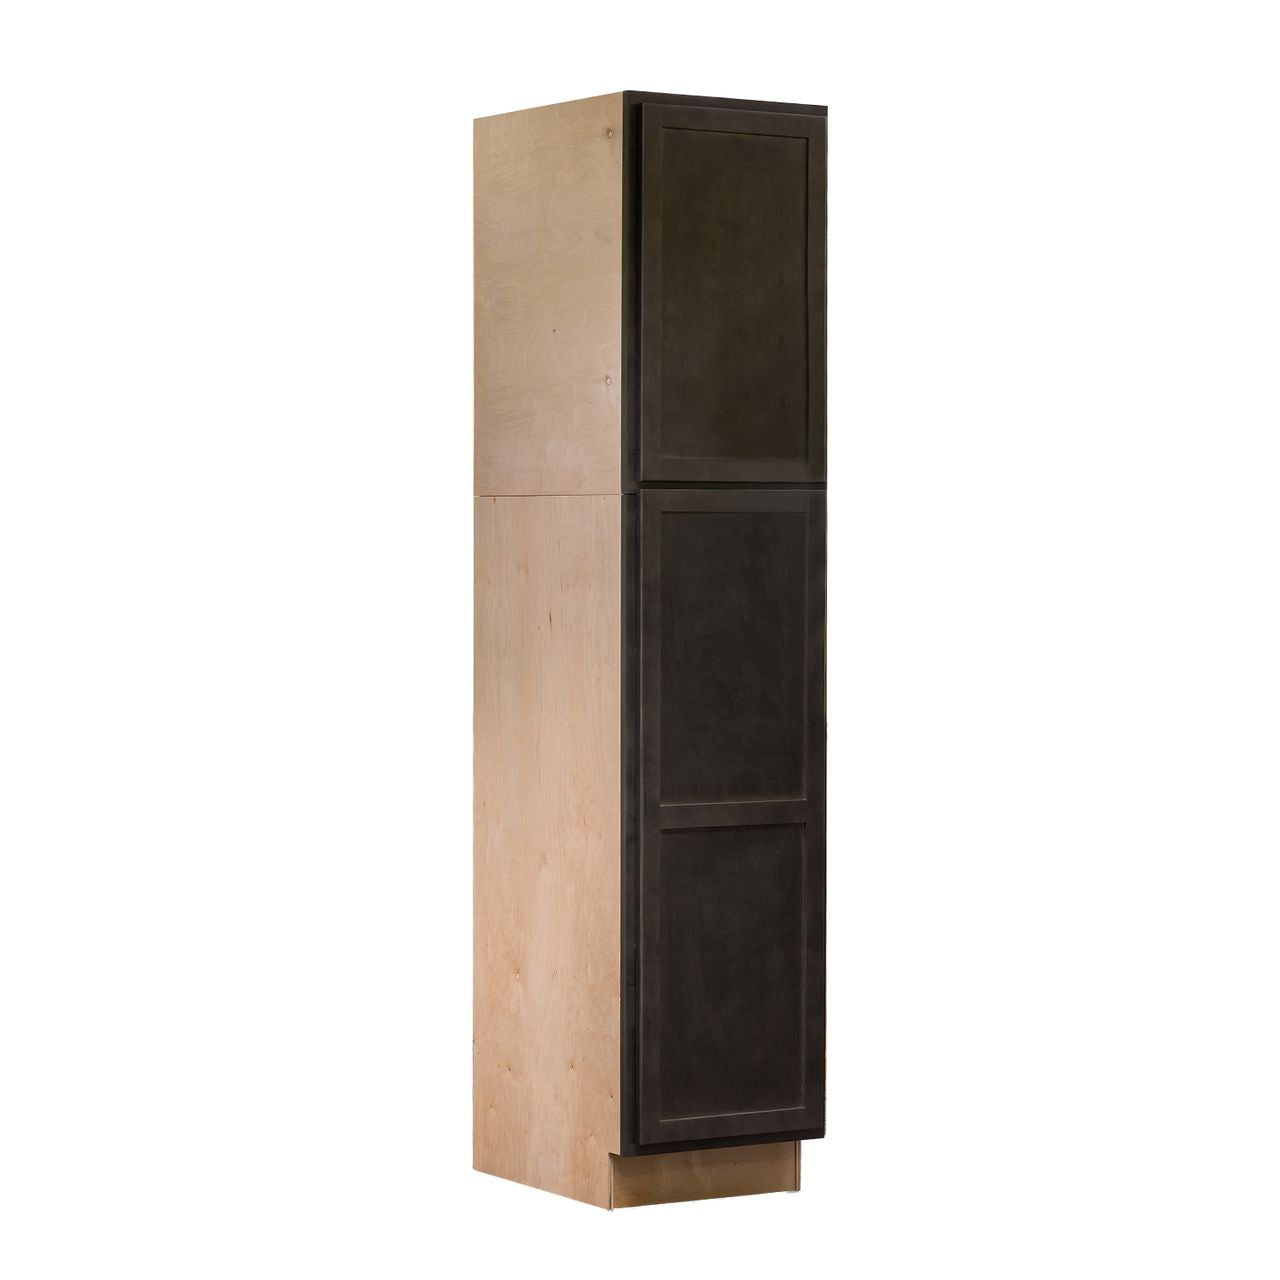 Quicklock RTA (Ready-to-Assemble) Espresso Stain Pantry Cabinet- 18"W